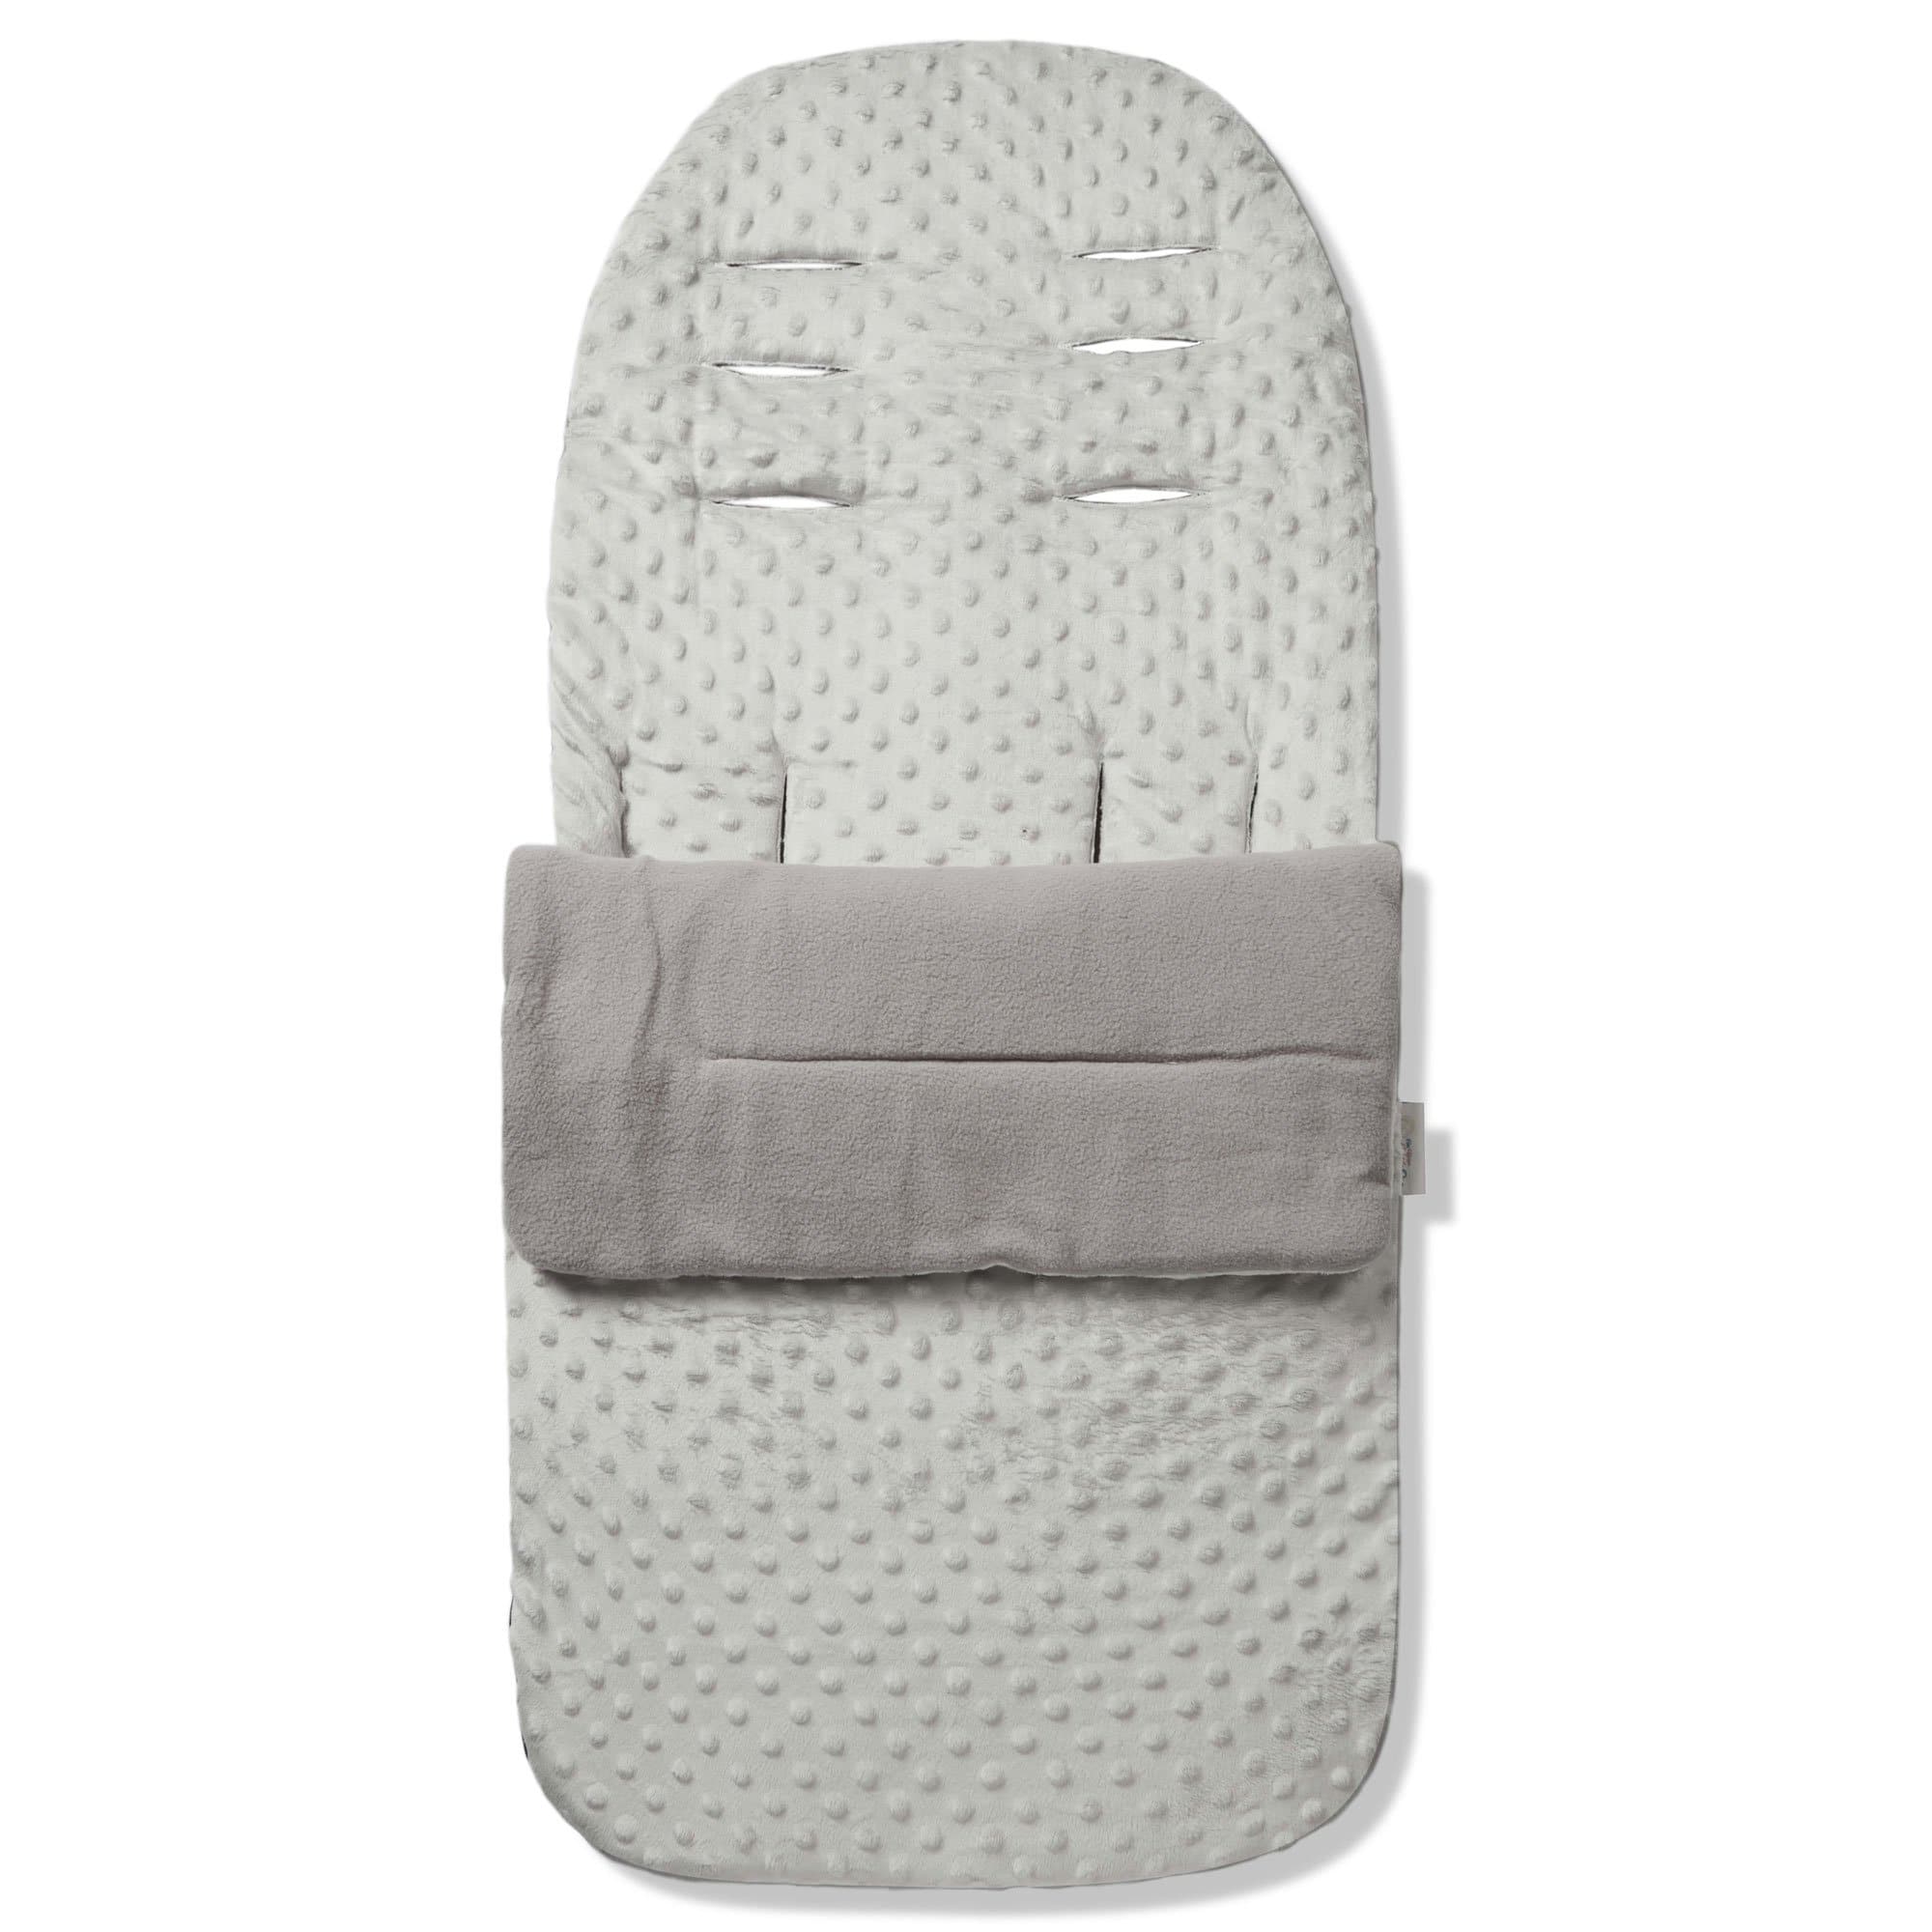 Dimple Footmuff / Cosy Toes Compatible with Egg - Grey / Fits All Models | For Your Little One